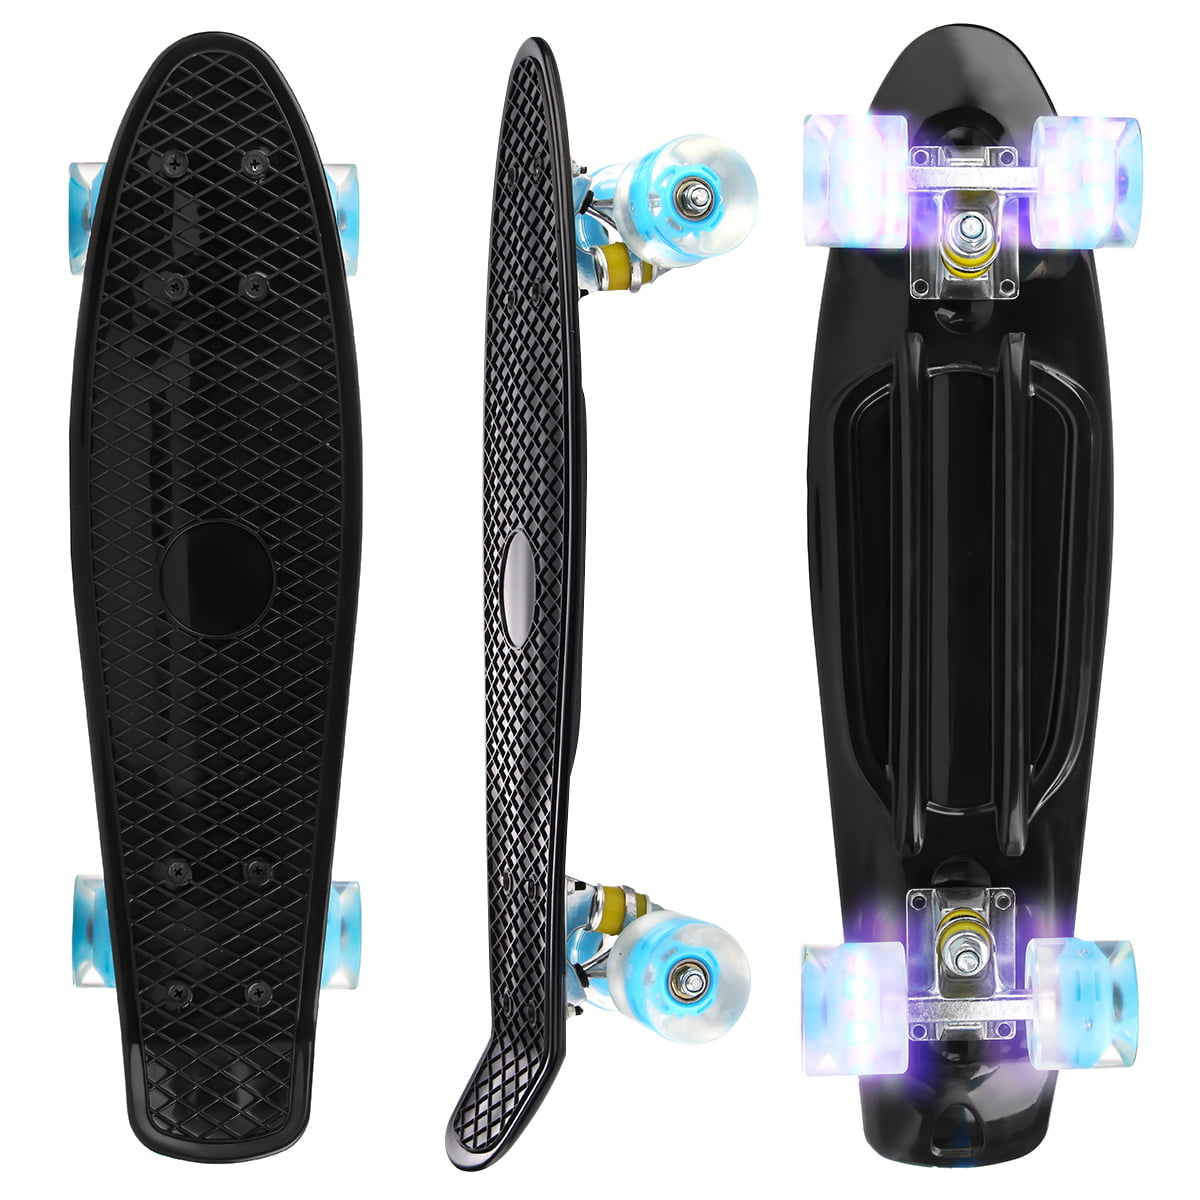 River Beach for Sea Perfect Surfing for Kids Teens and Adults Blue Pool HDPE Slick Bottom and Premium Wrist Leash Mssip Body Board Lightweight 33-37-41 inch with EPS Core XPE Deck